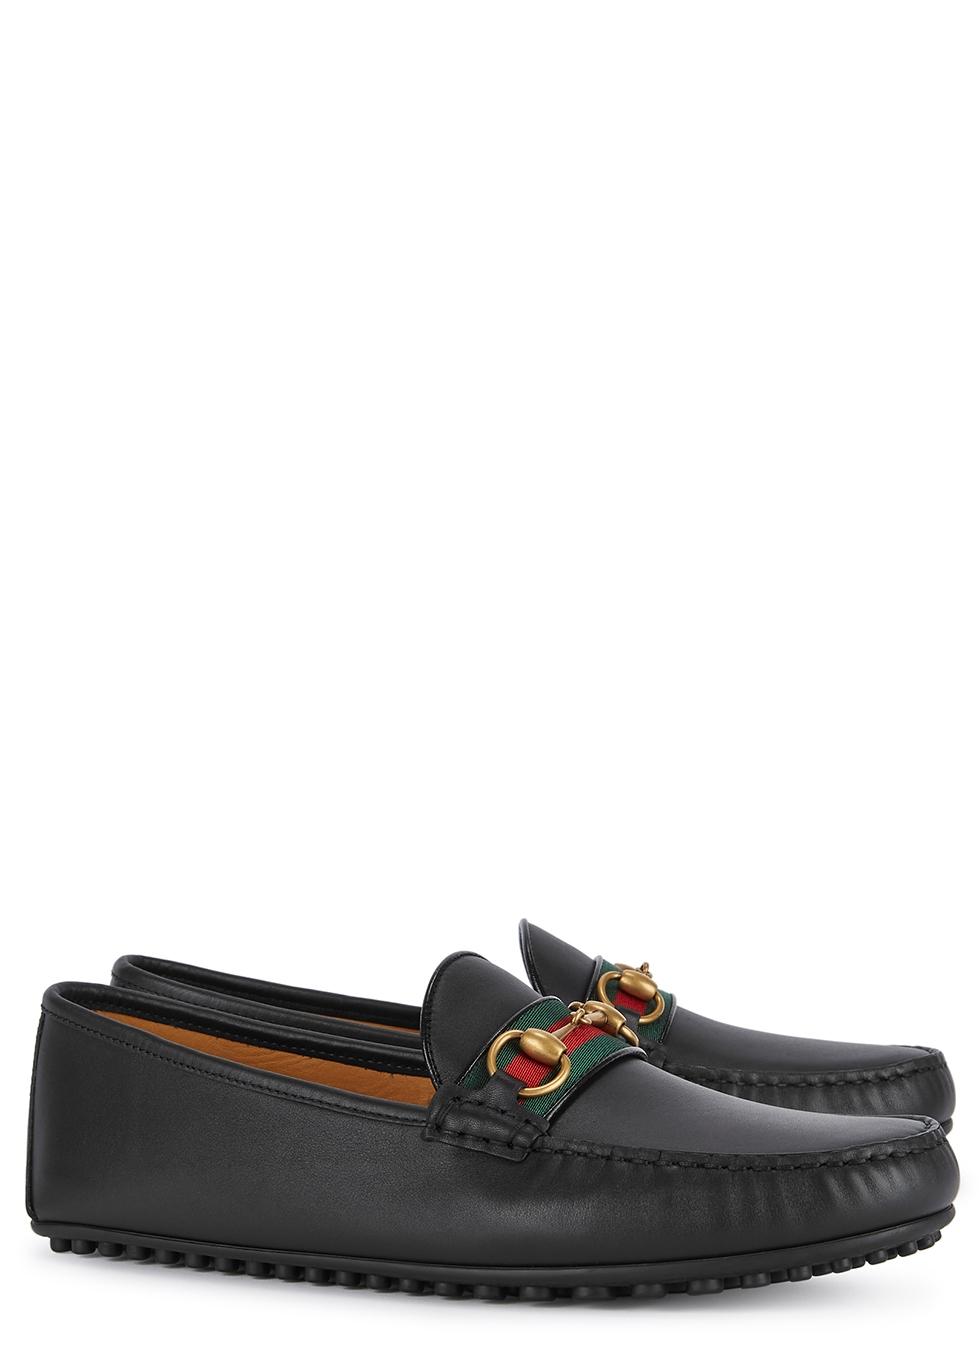 gucci kanye leather driving shoes